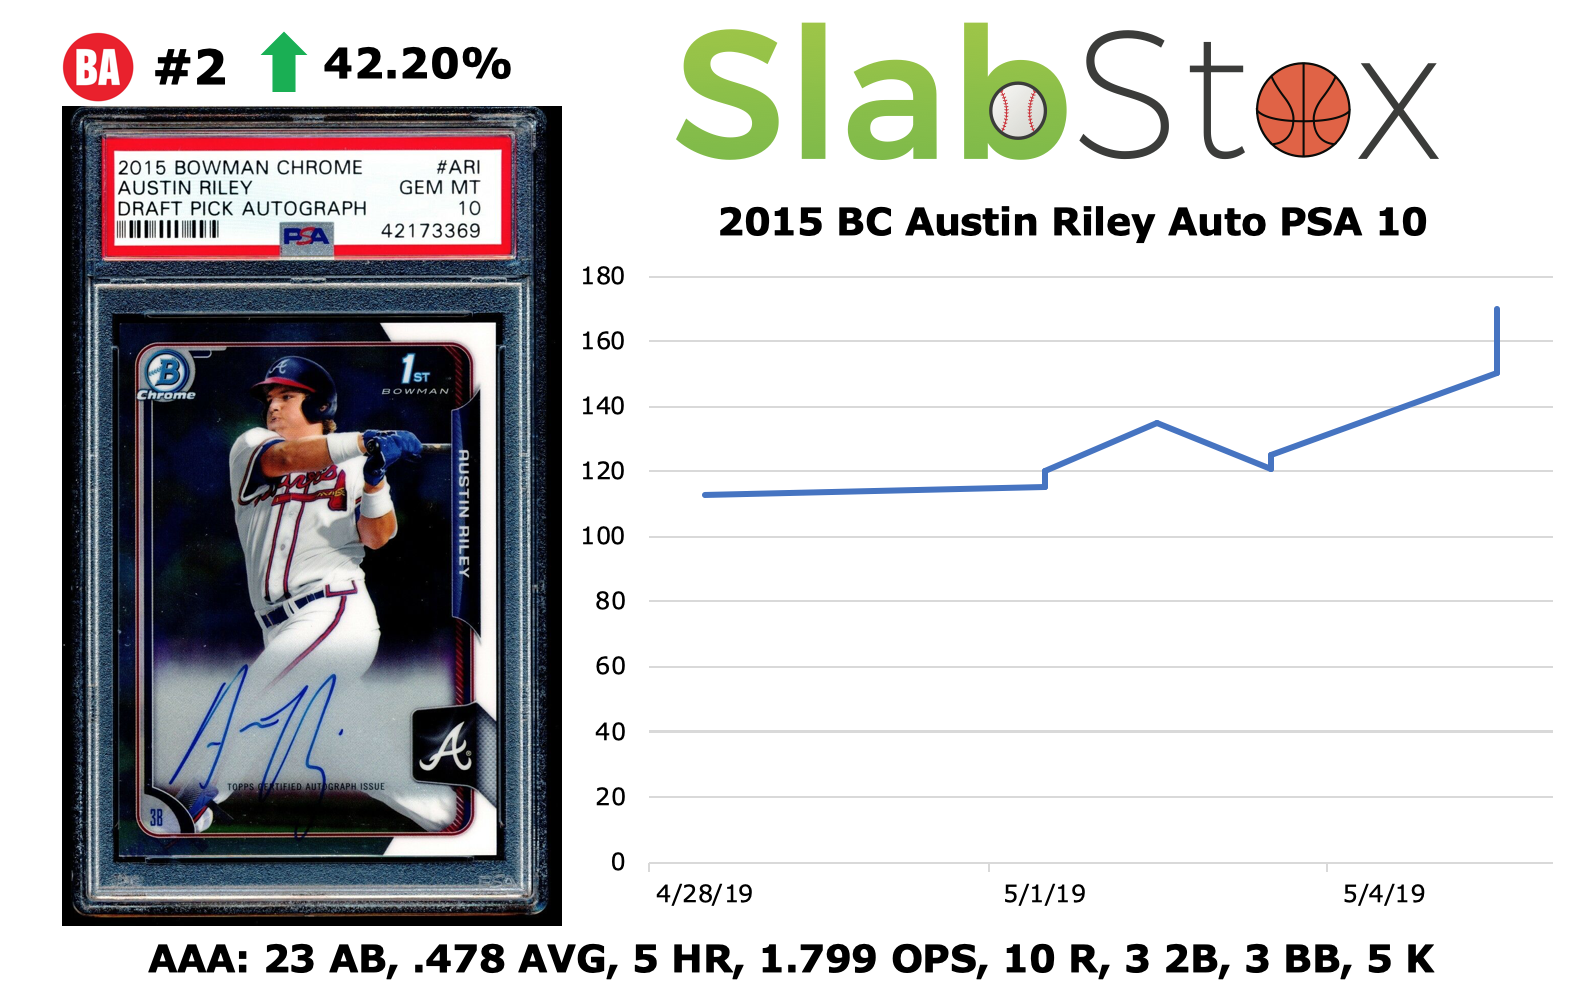 Graphic of 2015 BC Austin Riley Auto PSA 10 sports trading card by SlabStox